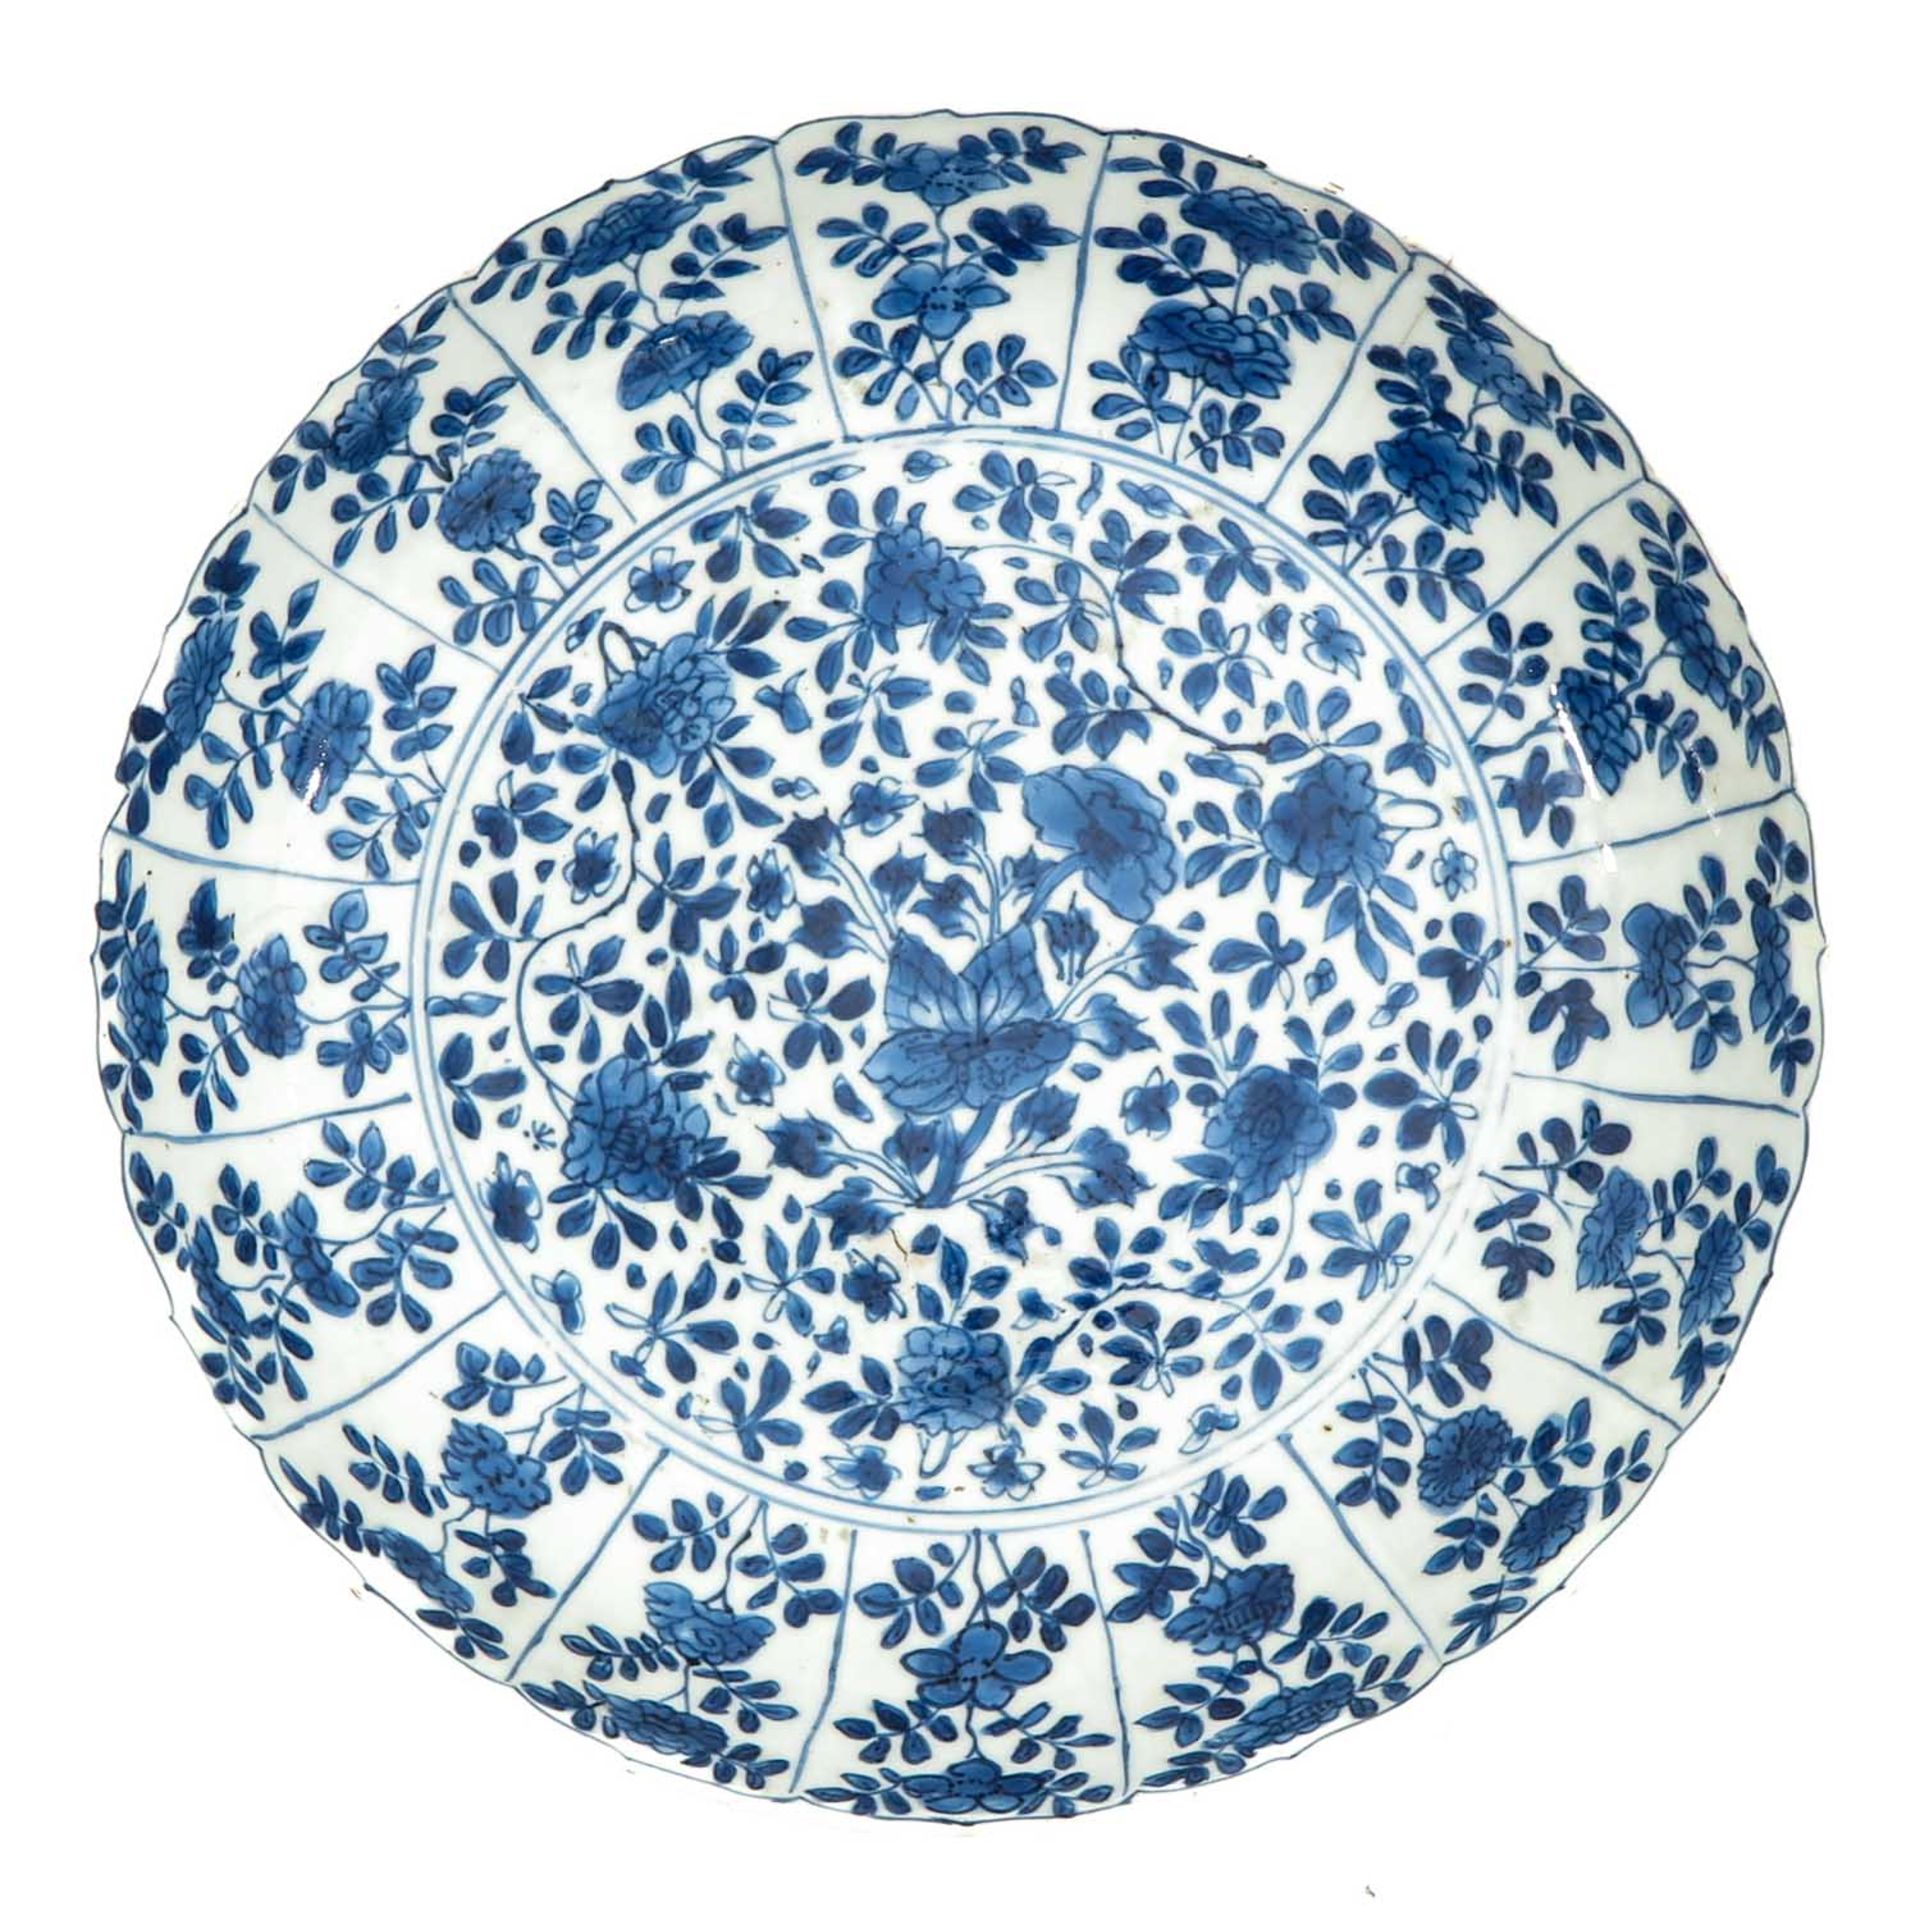 A Series of 3 Blue and White Plates - Image 3 of 10